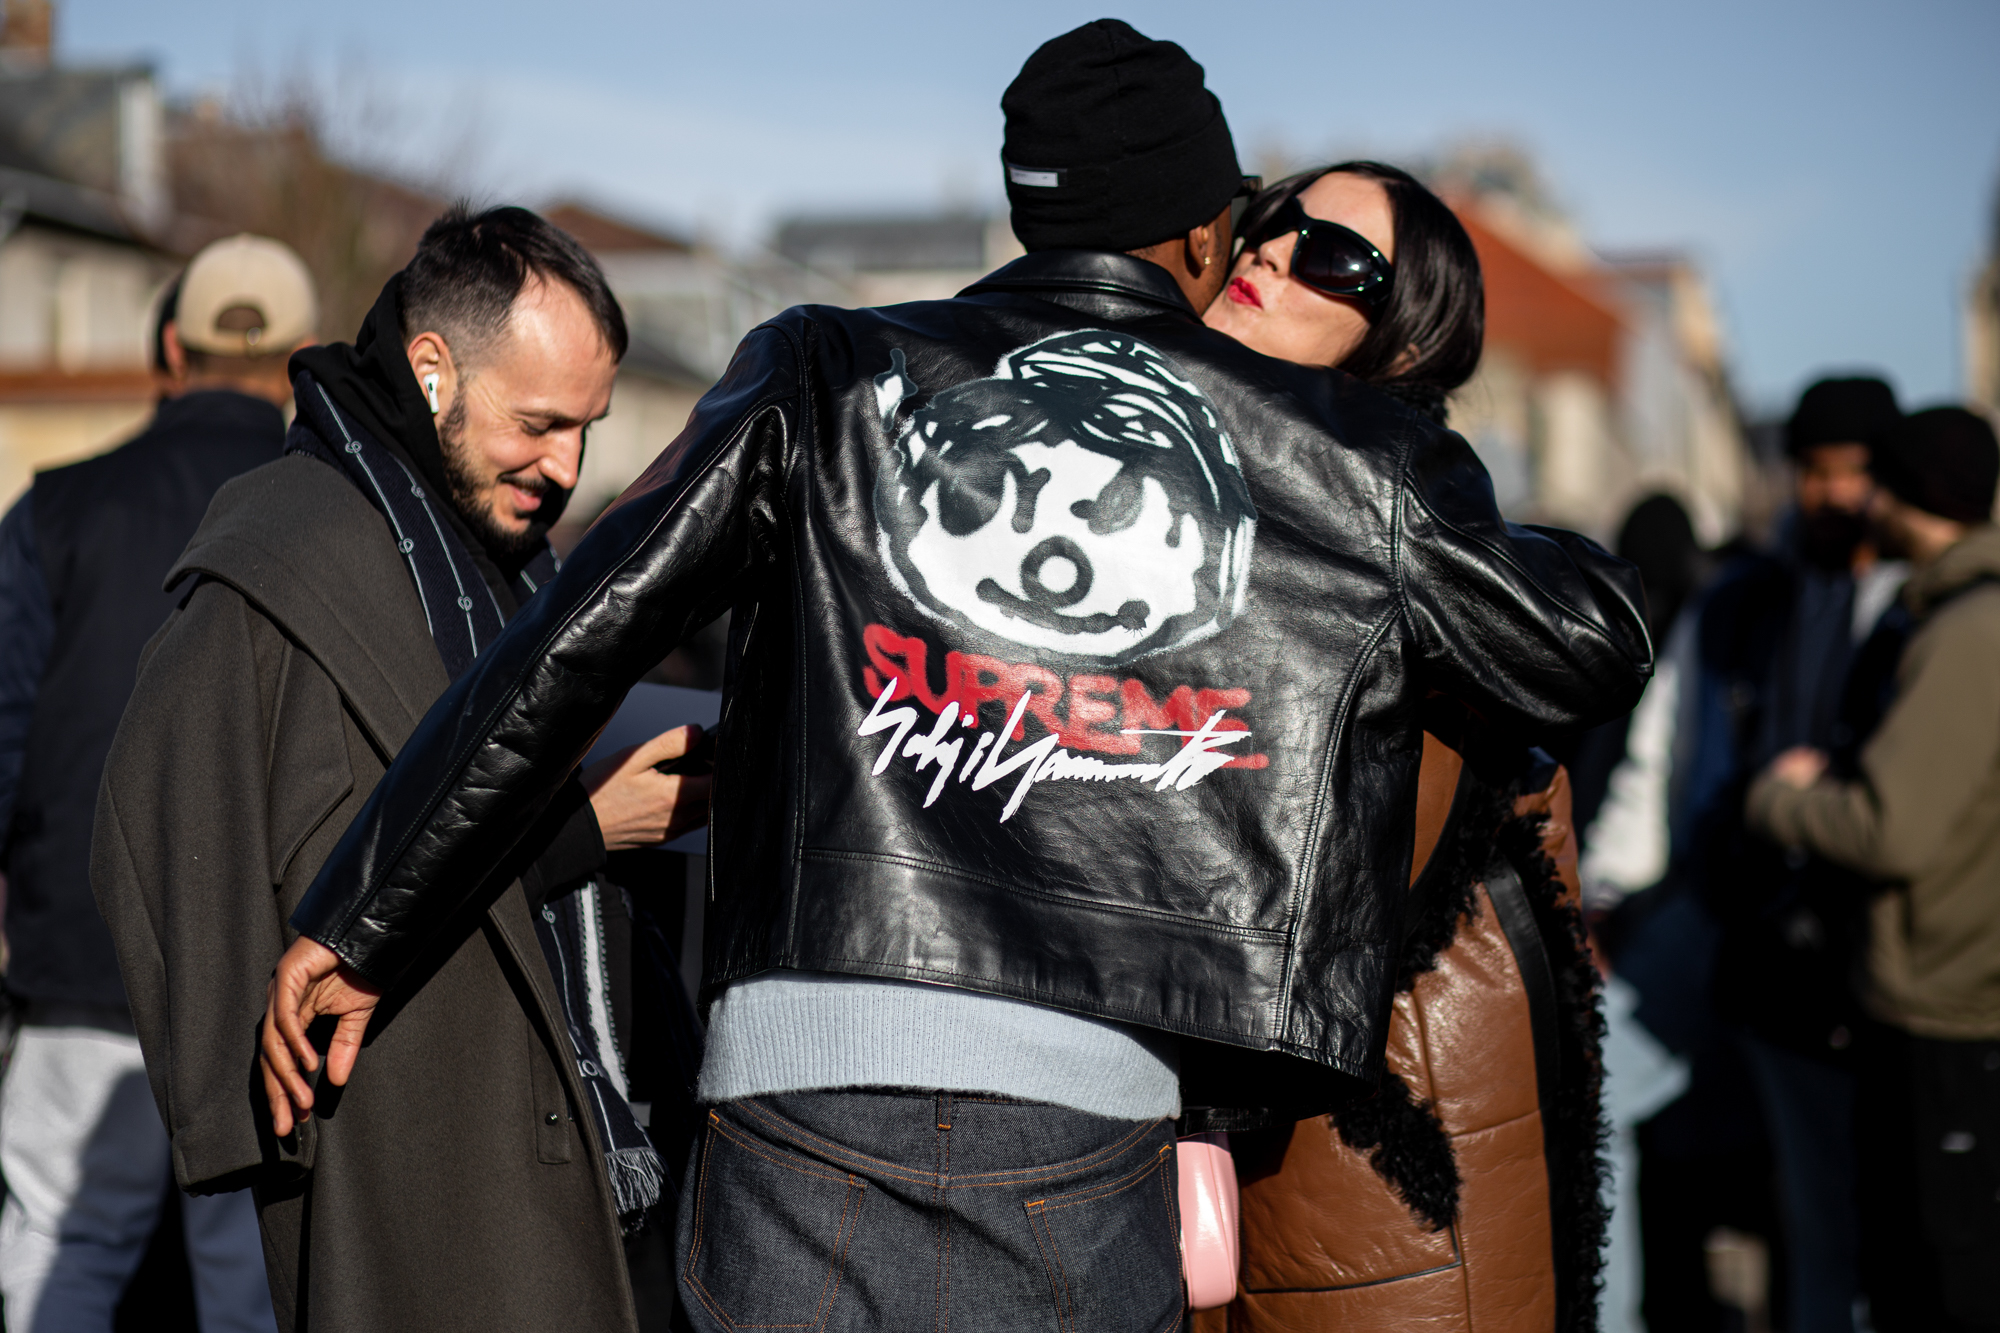 The Best Street Style From Paris Fashion Week 2023